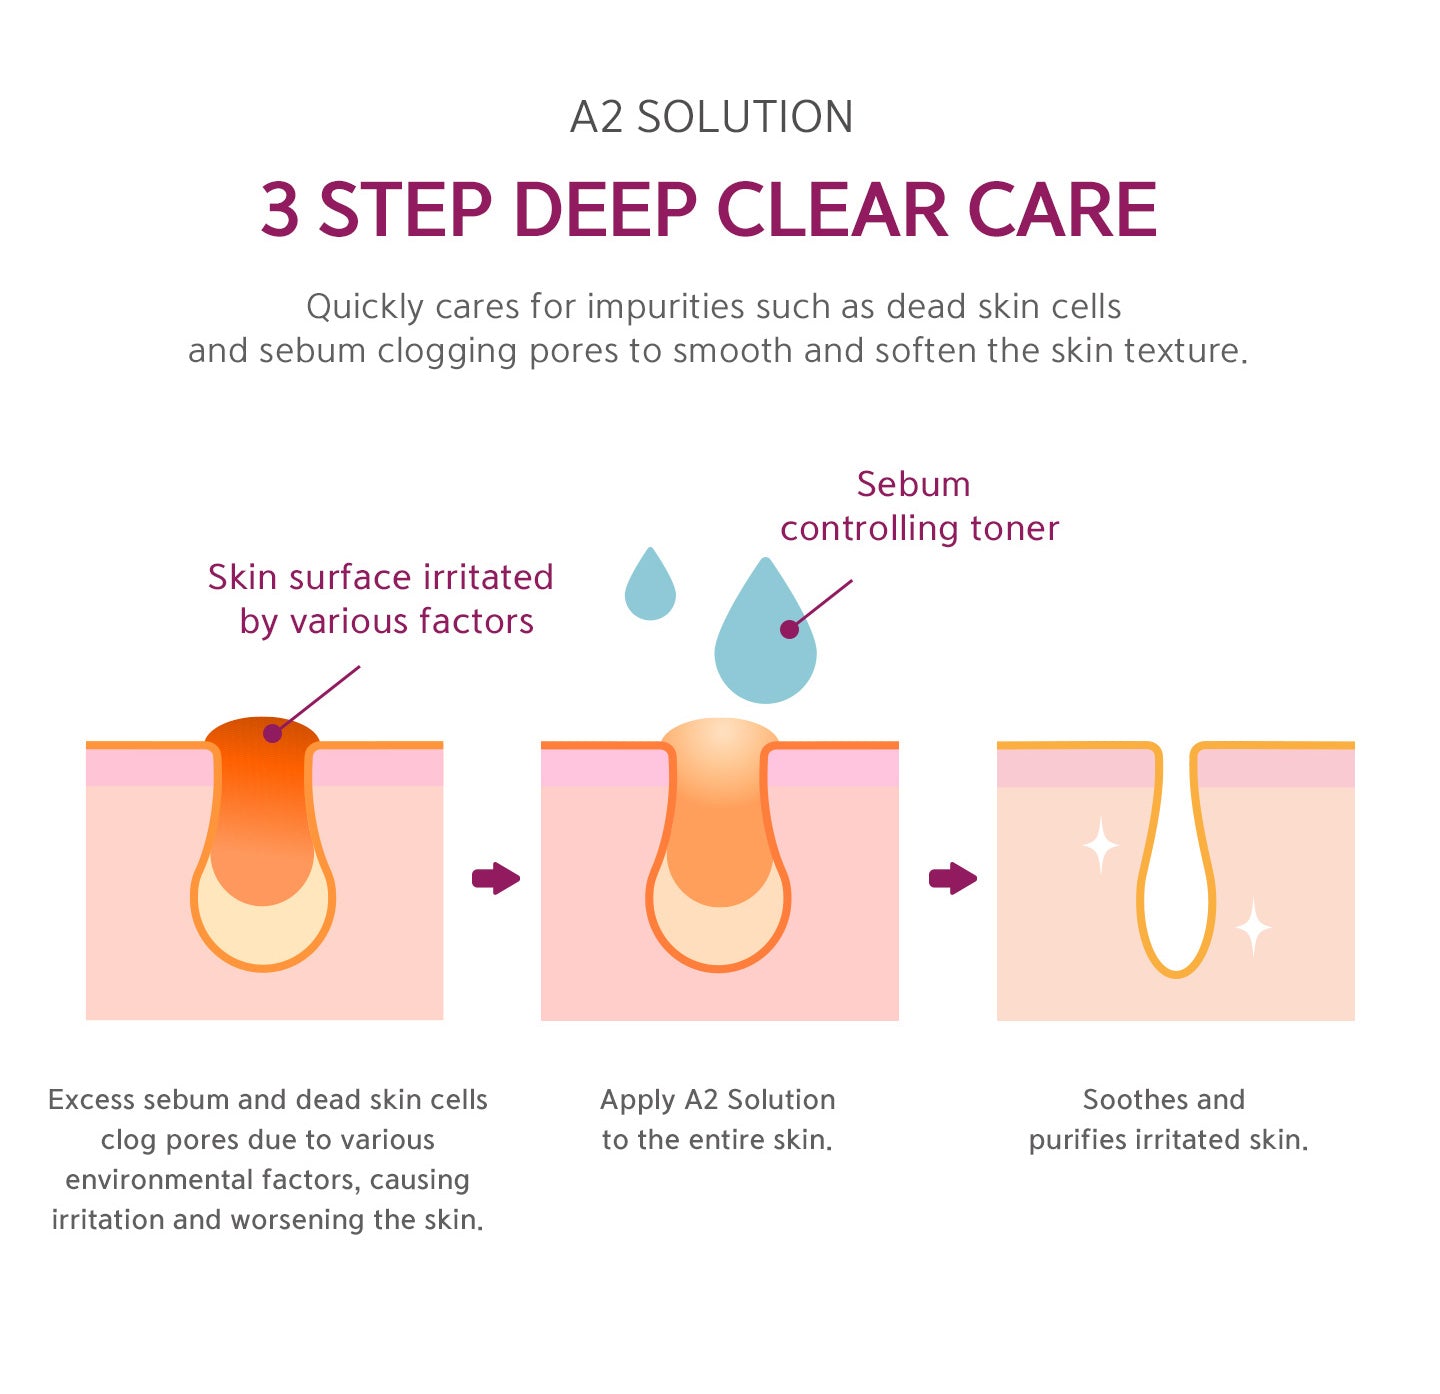 3 Step deep clear care. Quickly cares for impurities such as dead skin cells and sebum clogging pores to smooth and soften the skin texture. Skin surface irritated by various factors. Sebum controlling toner. 